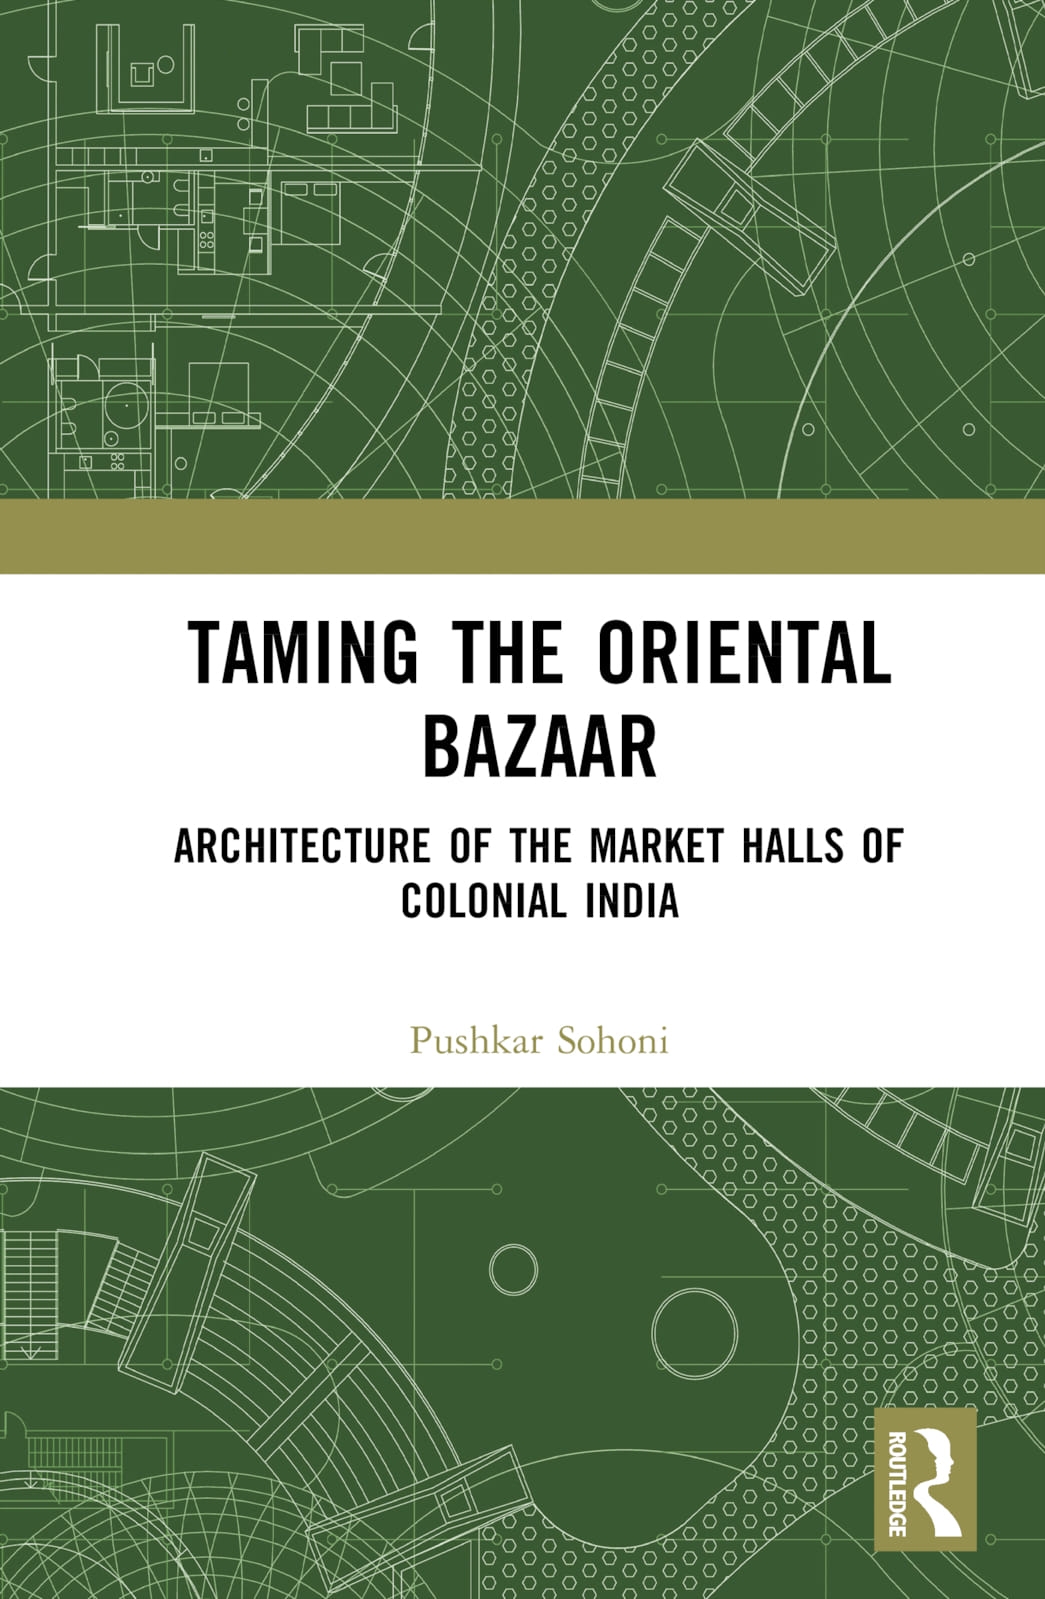 Taming the Oriental Bazaar: Architecture of the Market-Halls of Colonial India